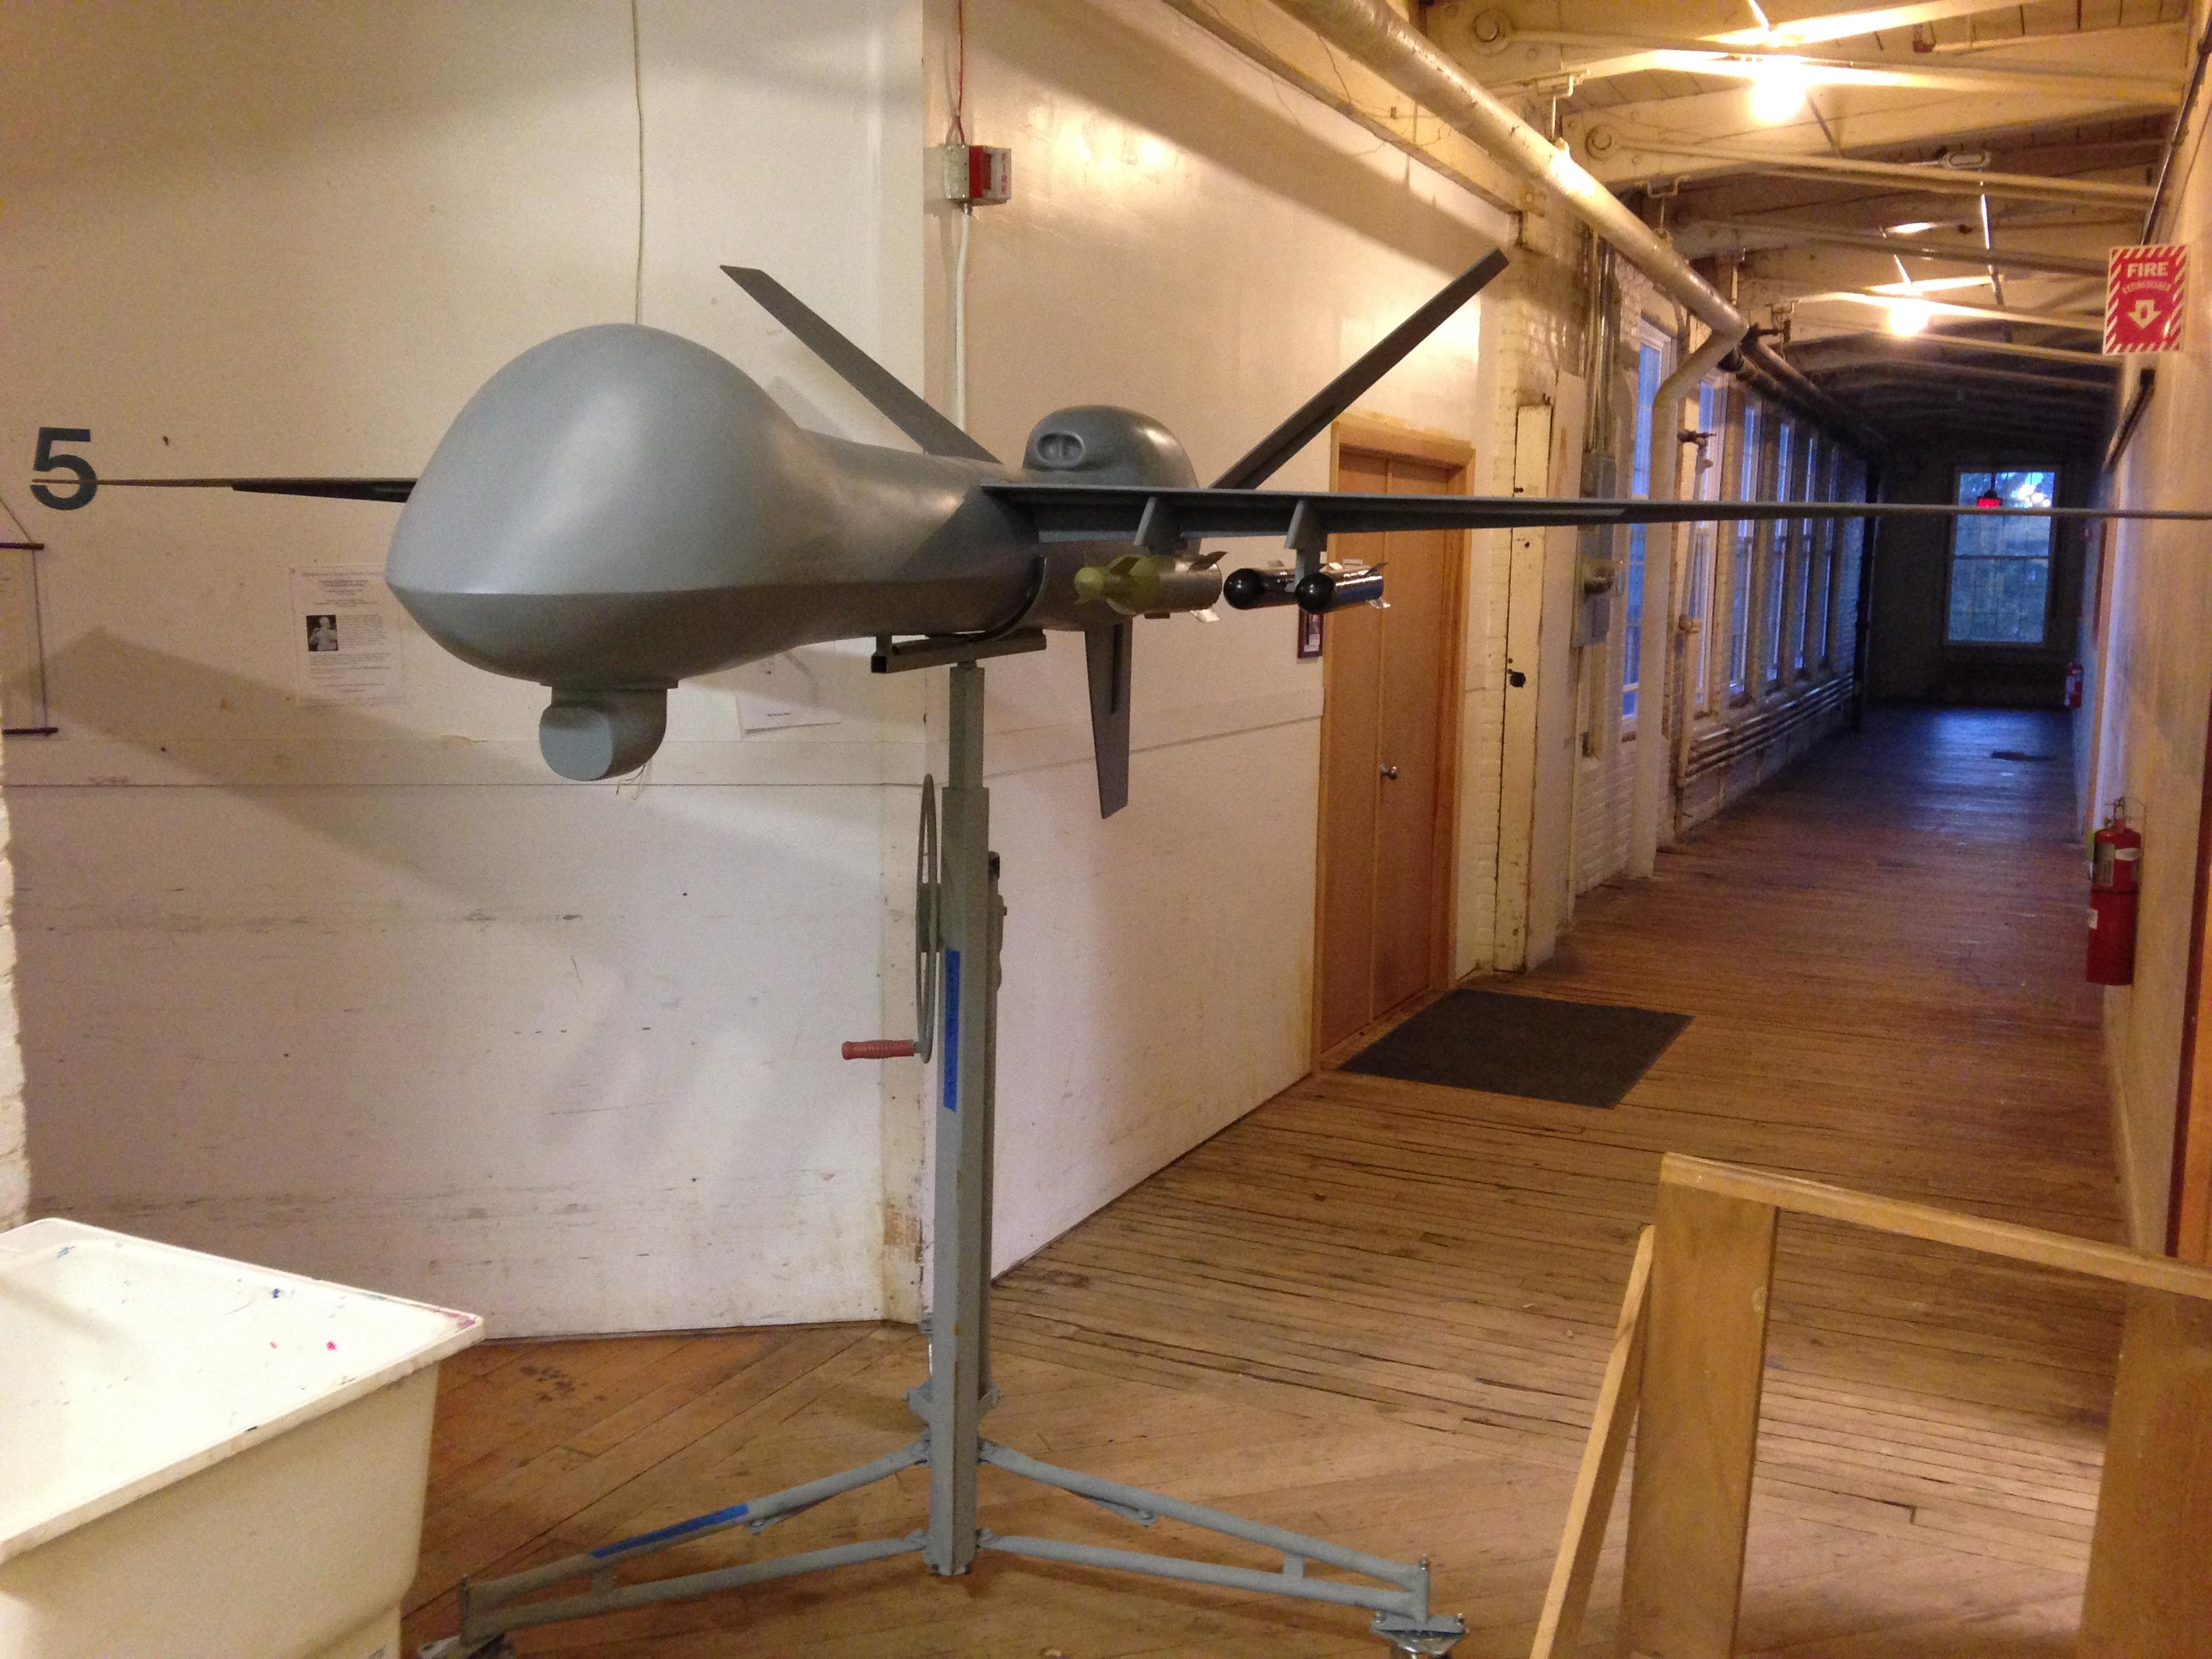 Drone model used for Amnesty's &quot;Game of Drones&quot; tour (Photo Credit: Amnesty International USA).